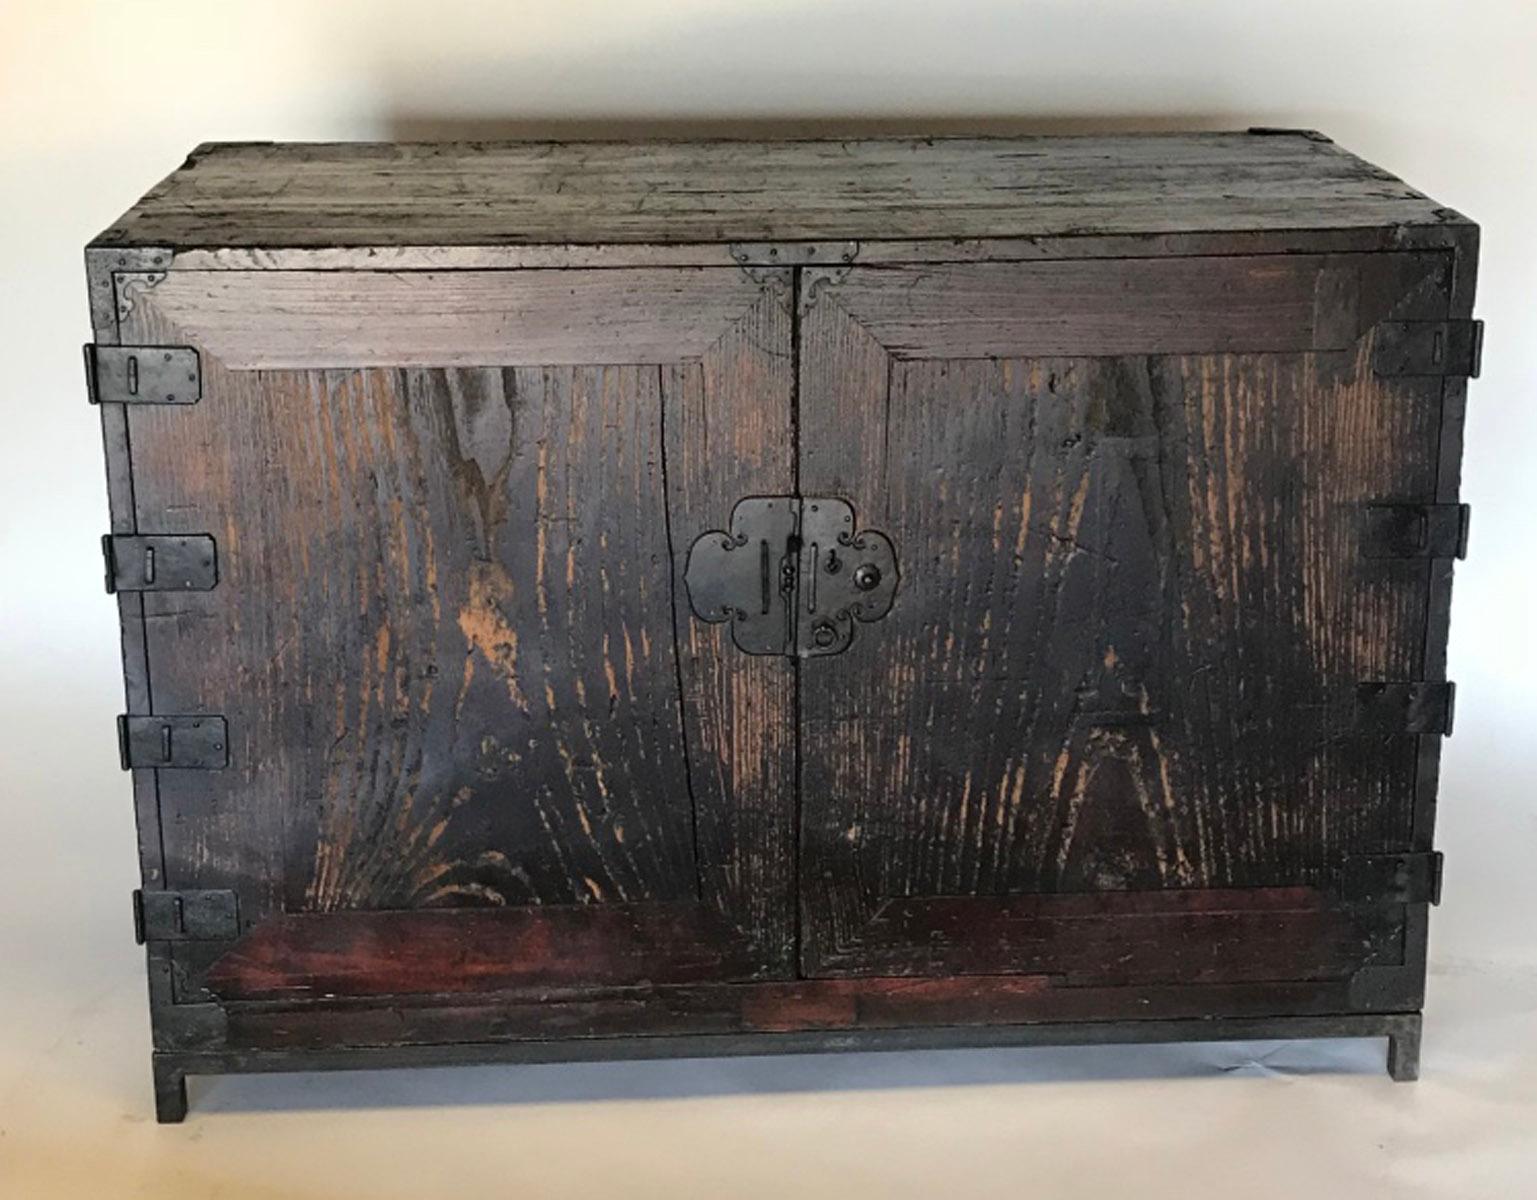 Japanese 18th century chest with beautiful original iron hardware. Two doors open revealing five interior drawers. Interior drawers are in excellent condition. Cabinet shows wear some wood deterioration but is still very handsome and sturdy and